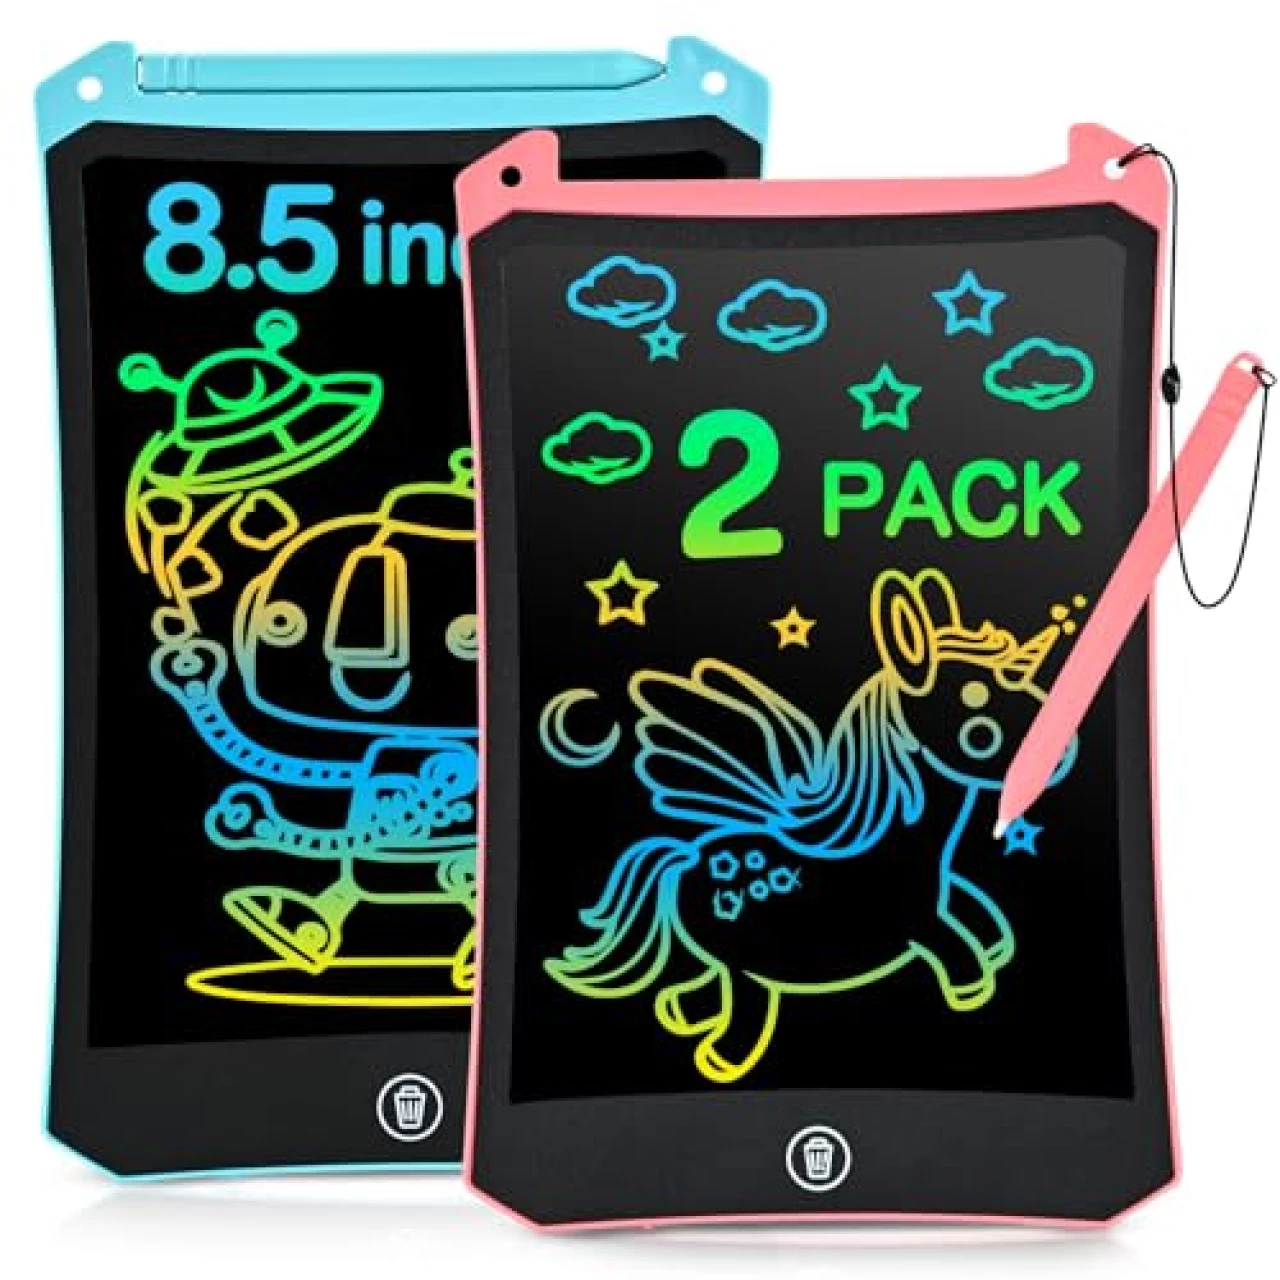 LCD Writing Tablet, 2 Pack Kids Toys Doodle Board, Colorful Drawing Pad Drawing Board, 8.5 Inch Doodle Pad Drawing Tablets for Kids, Toddlers Toys Birthday Gifts for Girls Boys Age 3-8